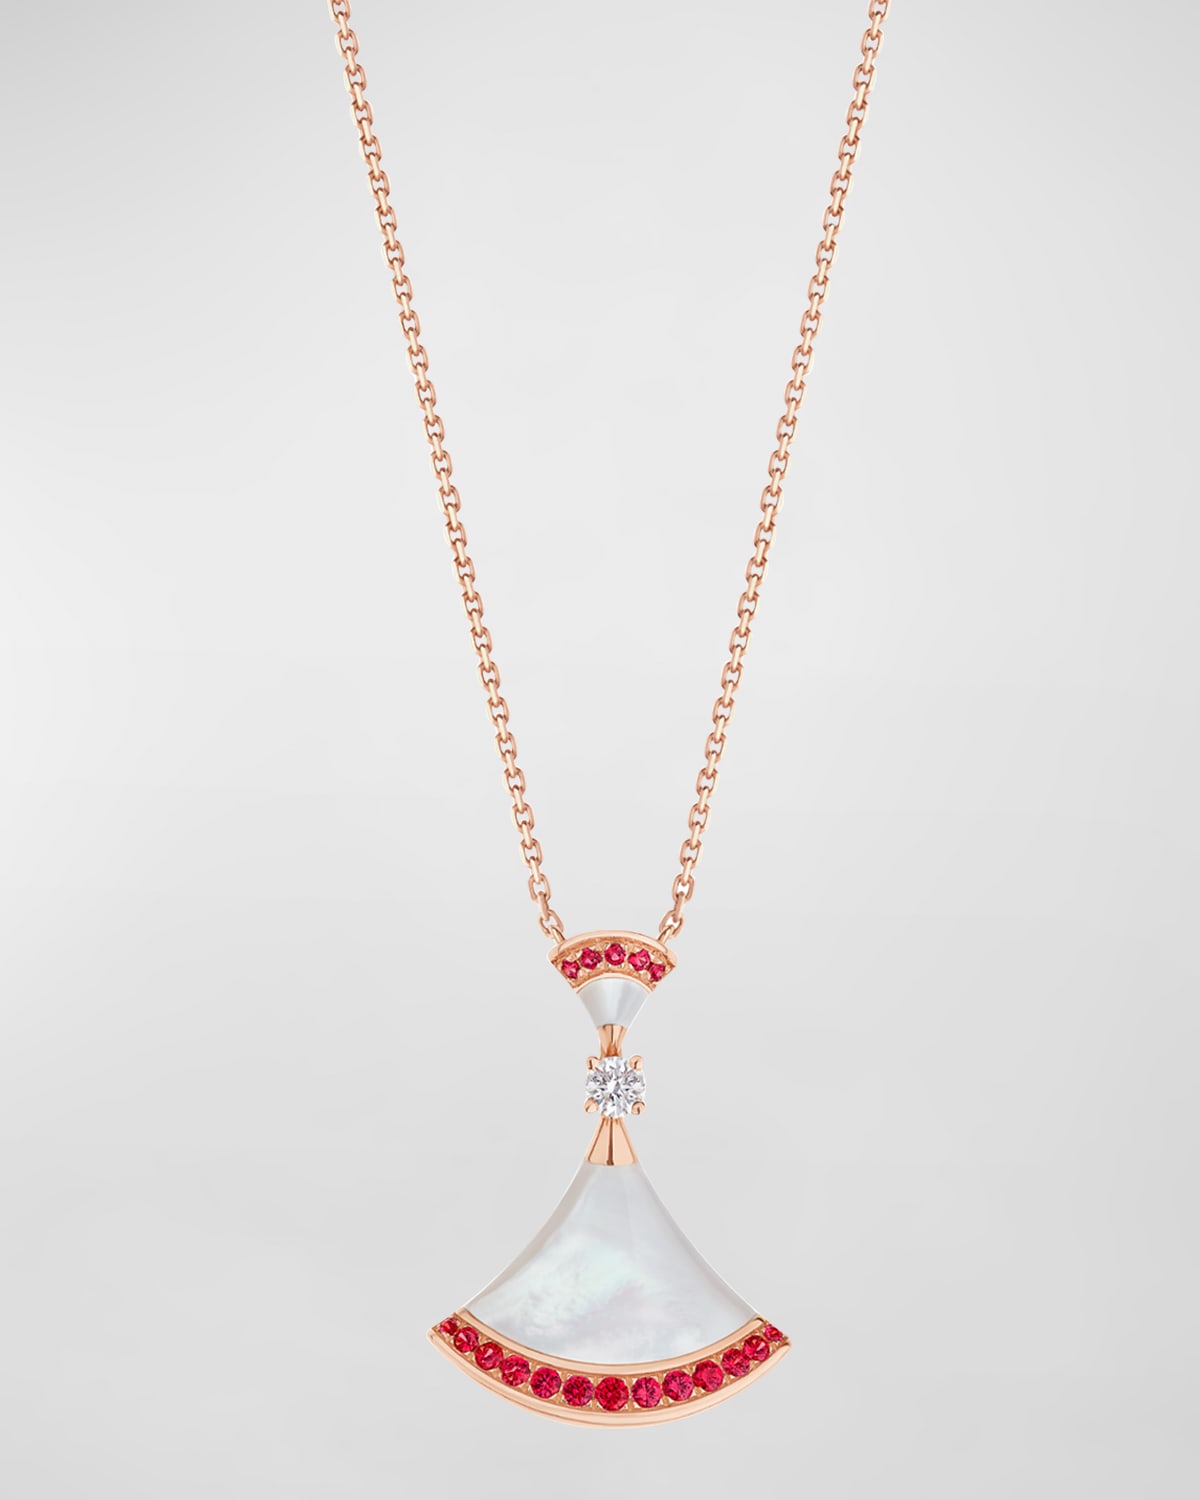 Diva's Dream Mother-of-Pearl Necklace with Diamond and Rubies